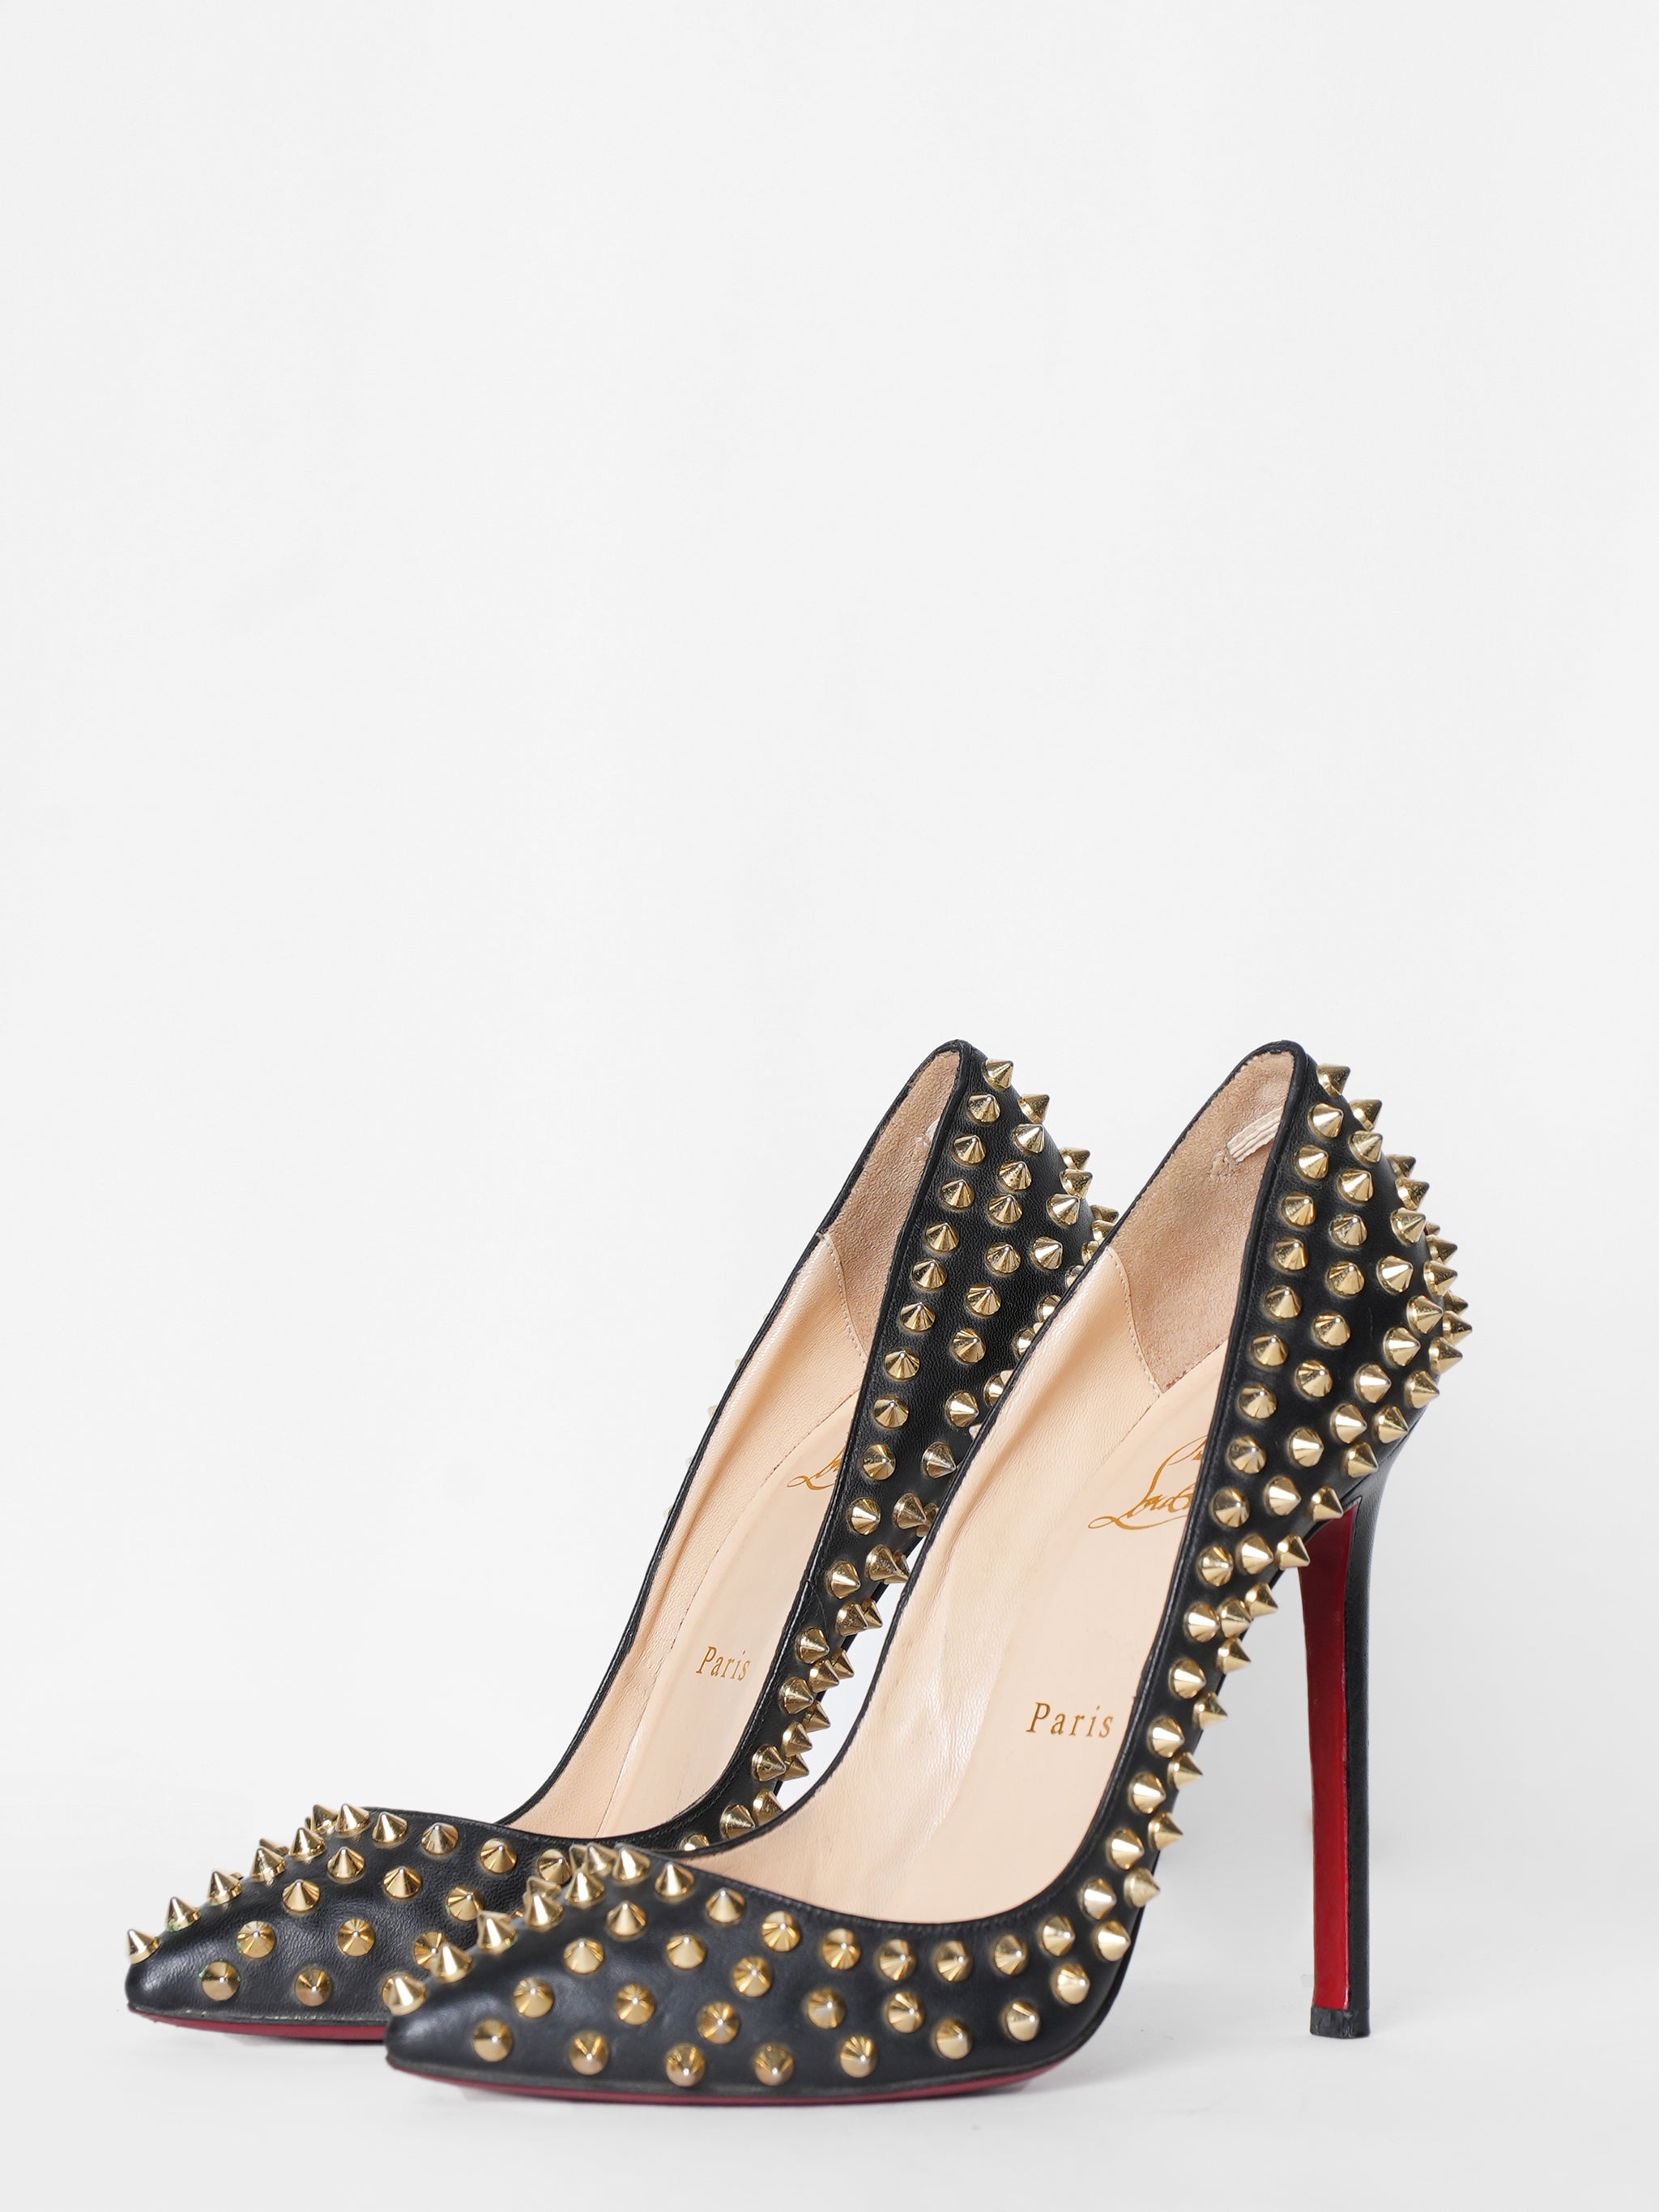 Christian Louboutin Pigalle Spike Pumps